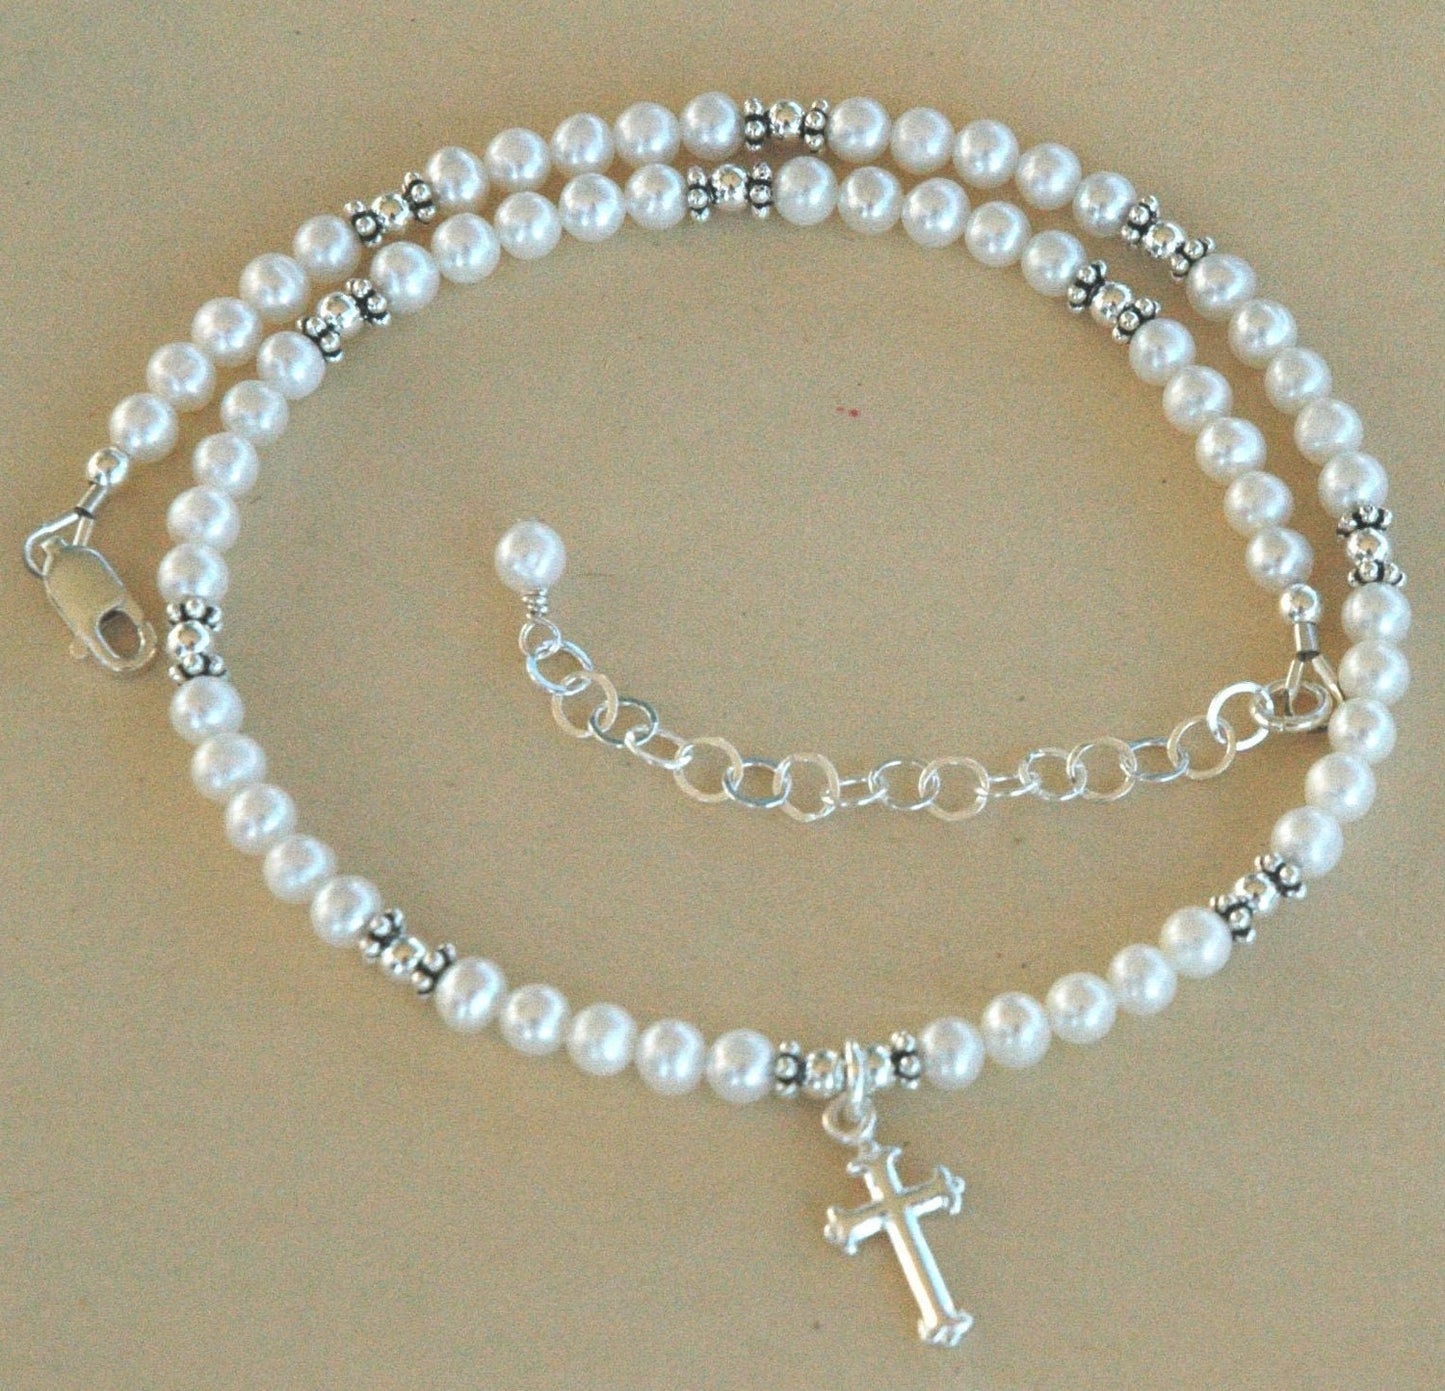 Pearl Cross Necklace, Baptism Pearl Necklace,First Communion Confirmation Christening Pearl Cross Necklace,Flower Girl Pearl Cross Necklace